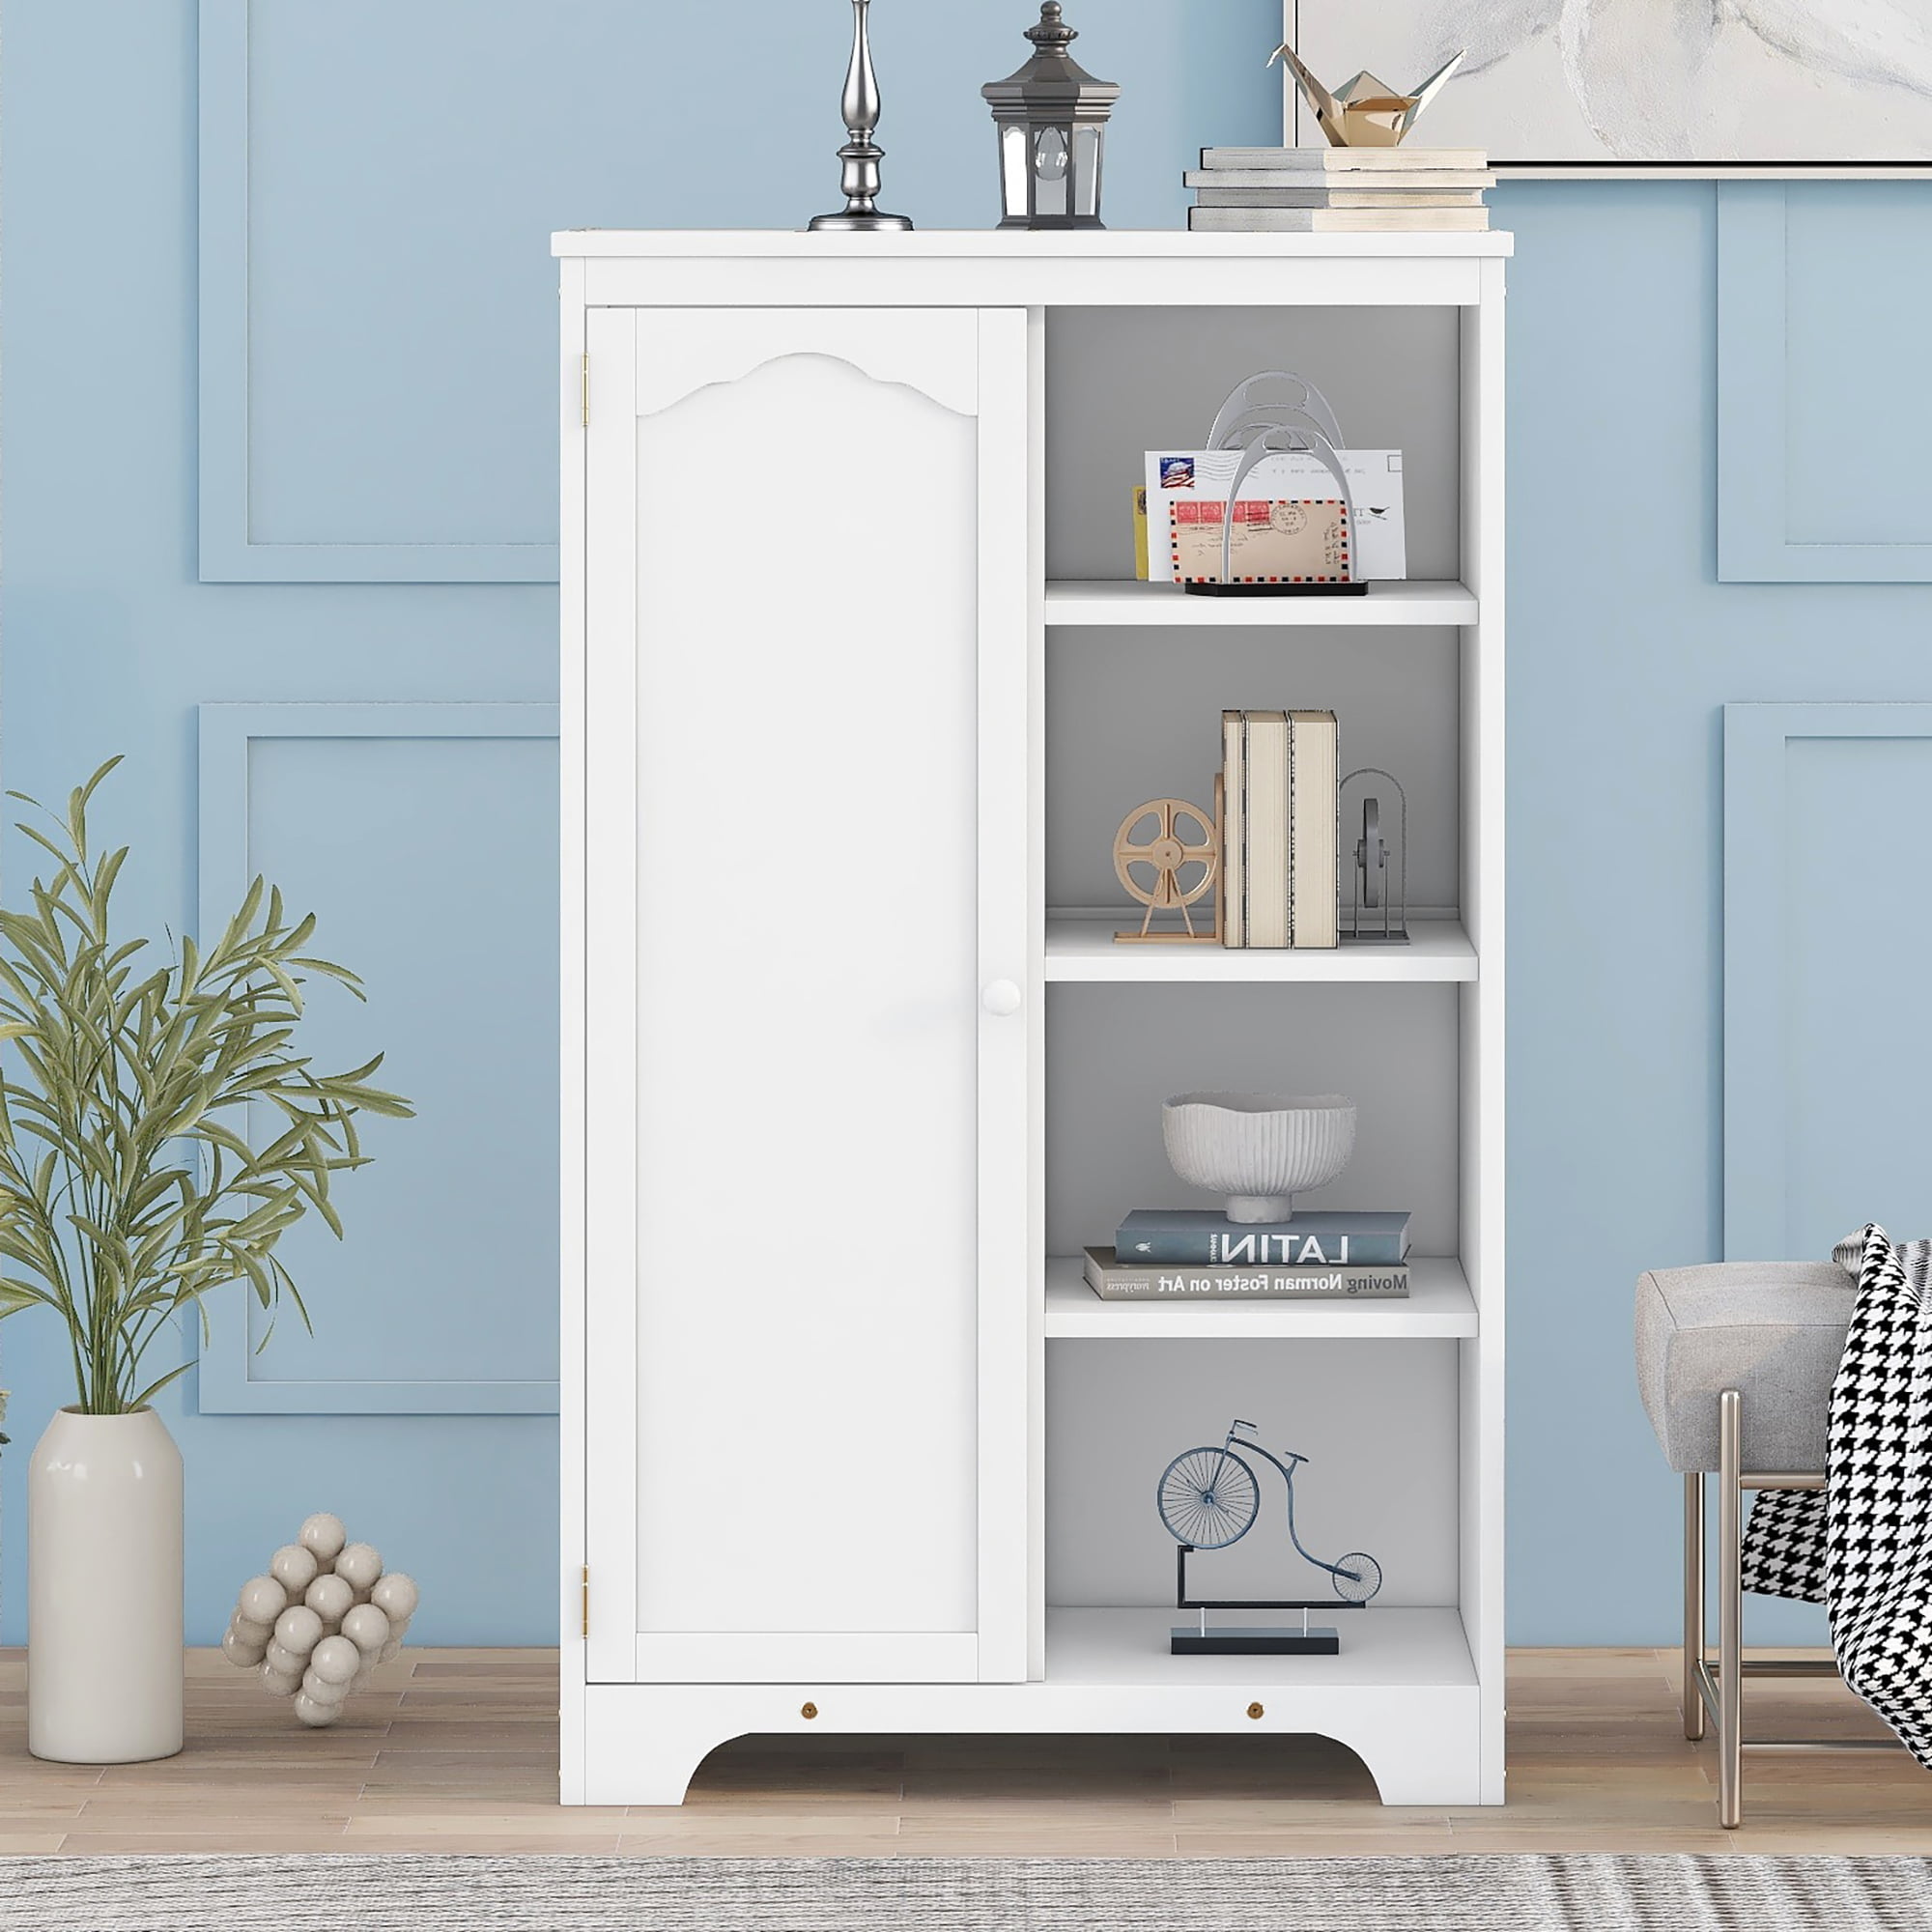 Practical Side Cabinet With 1 Door And 1 Shelf - W69757172